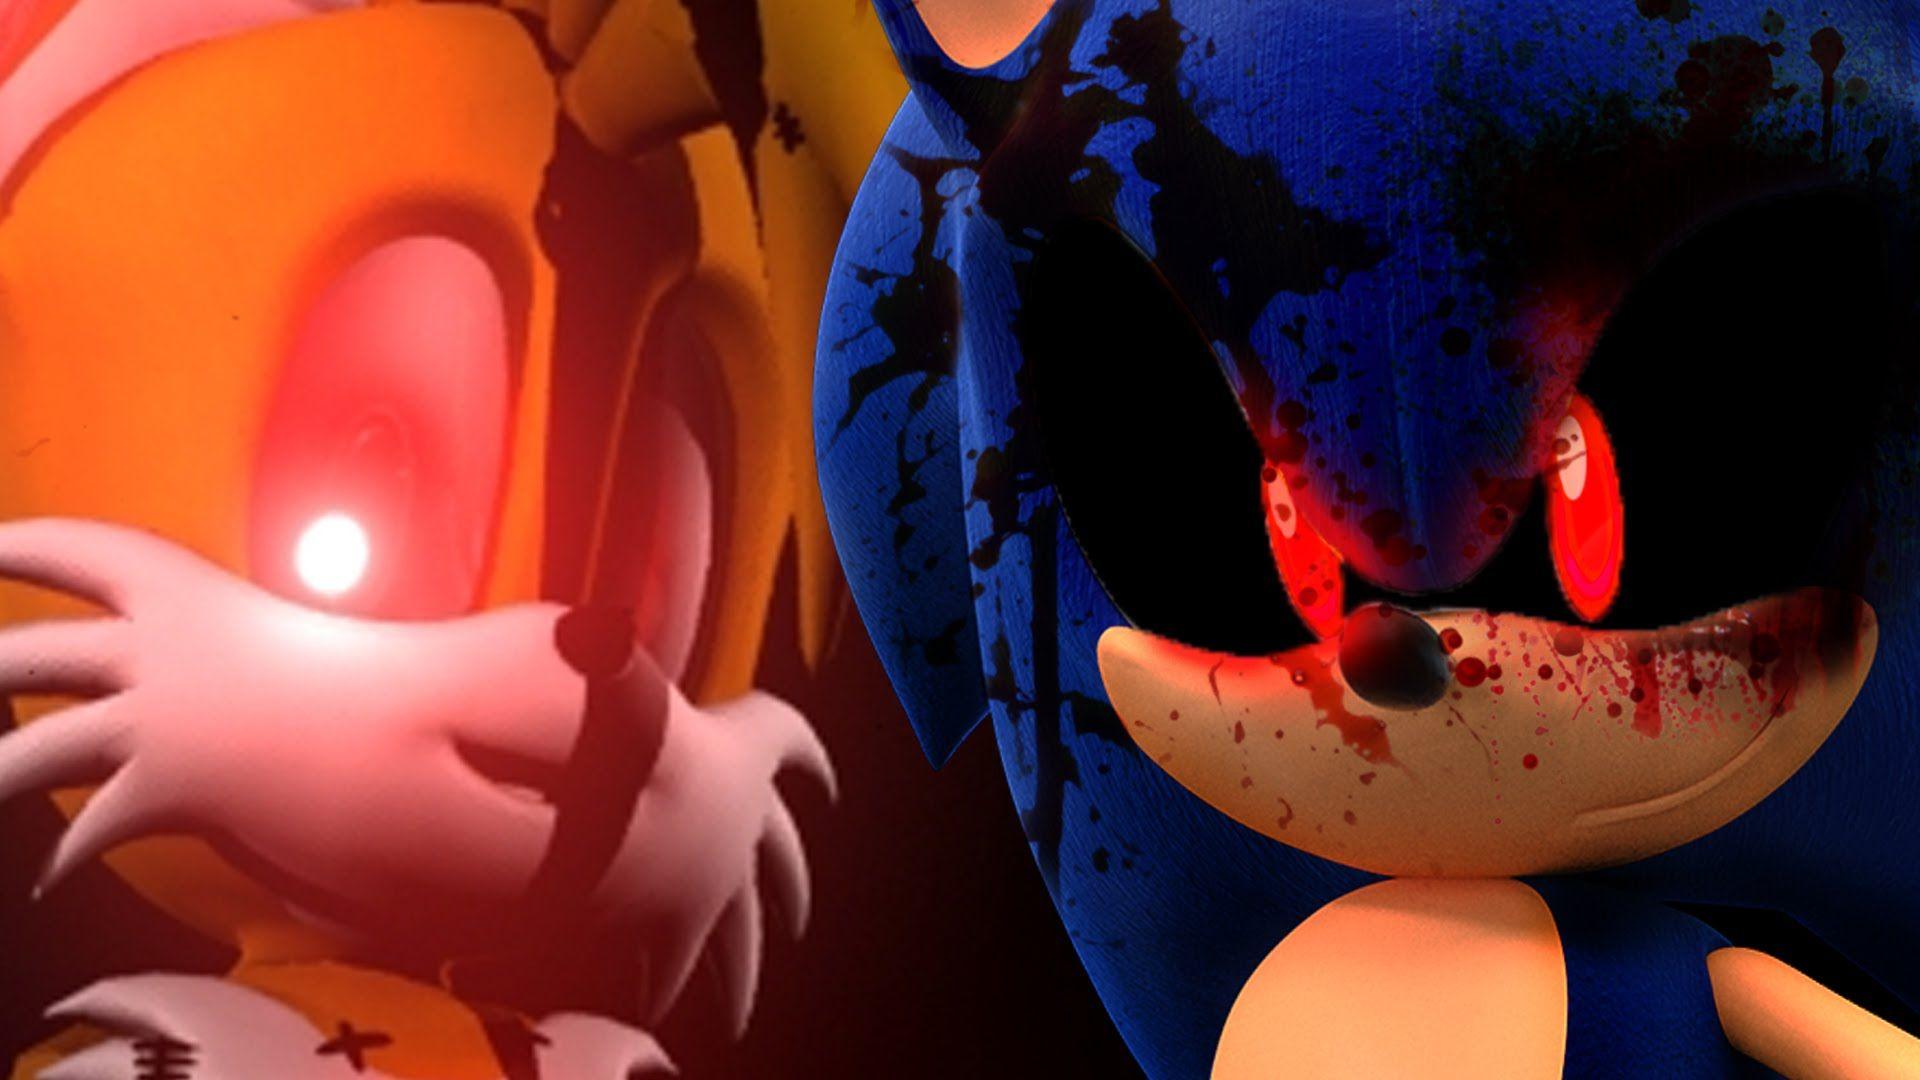 Sonic.EXE Wallpapers - Wallpaper Cave